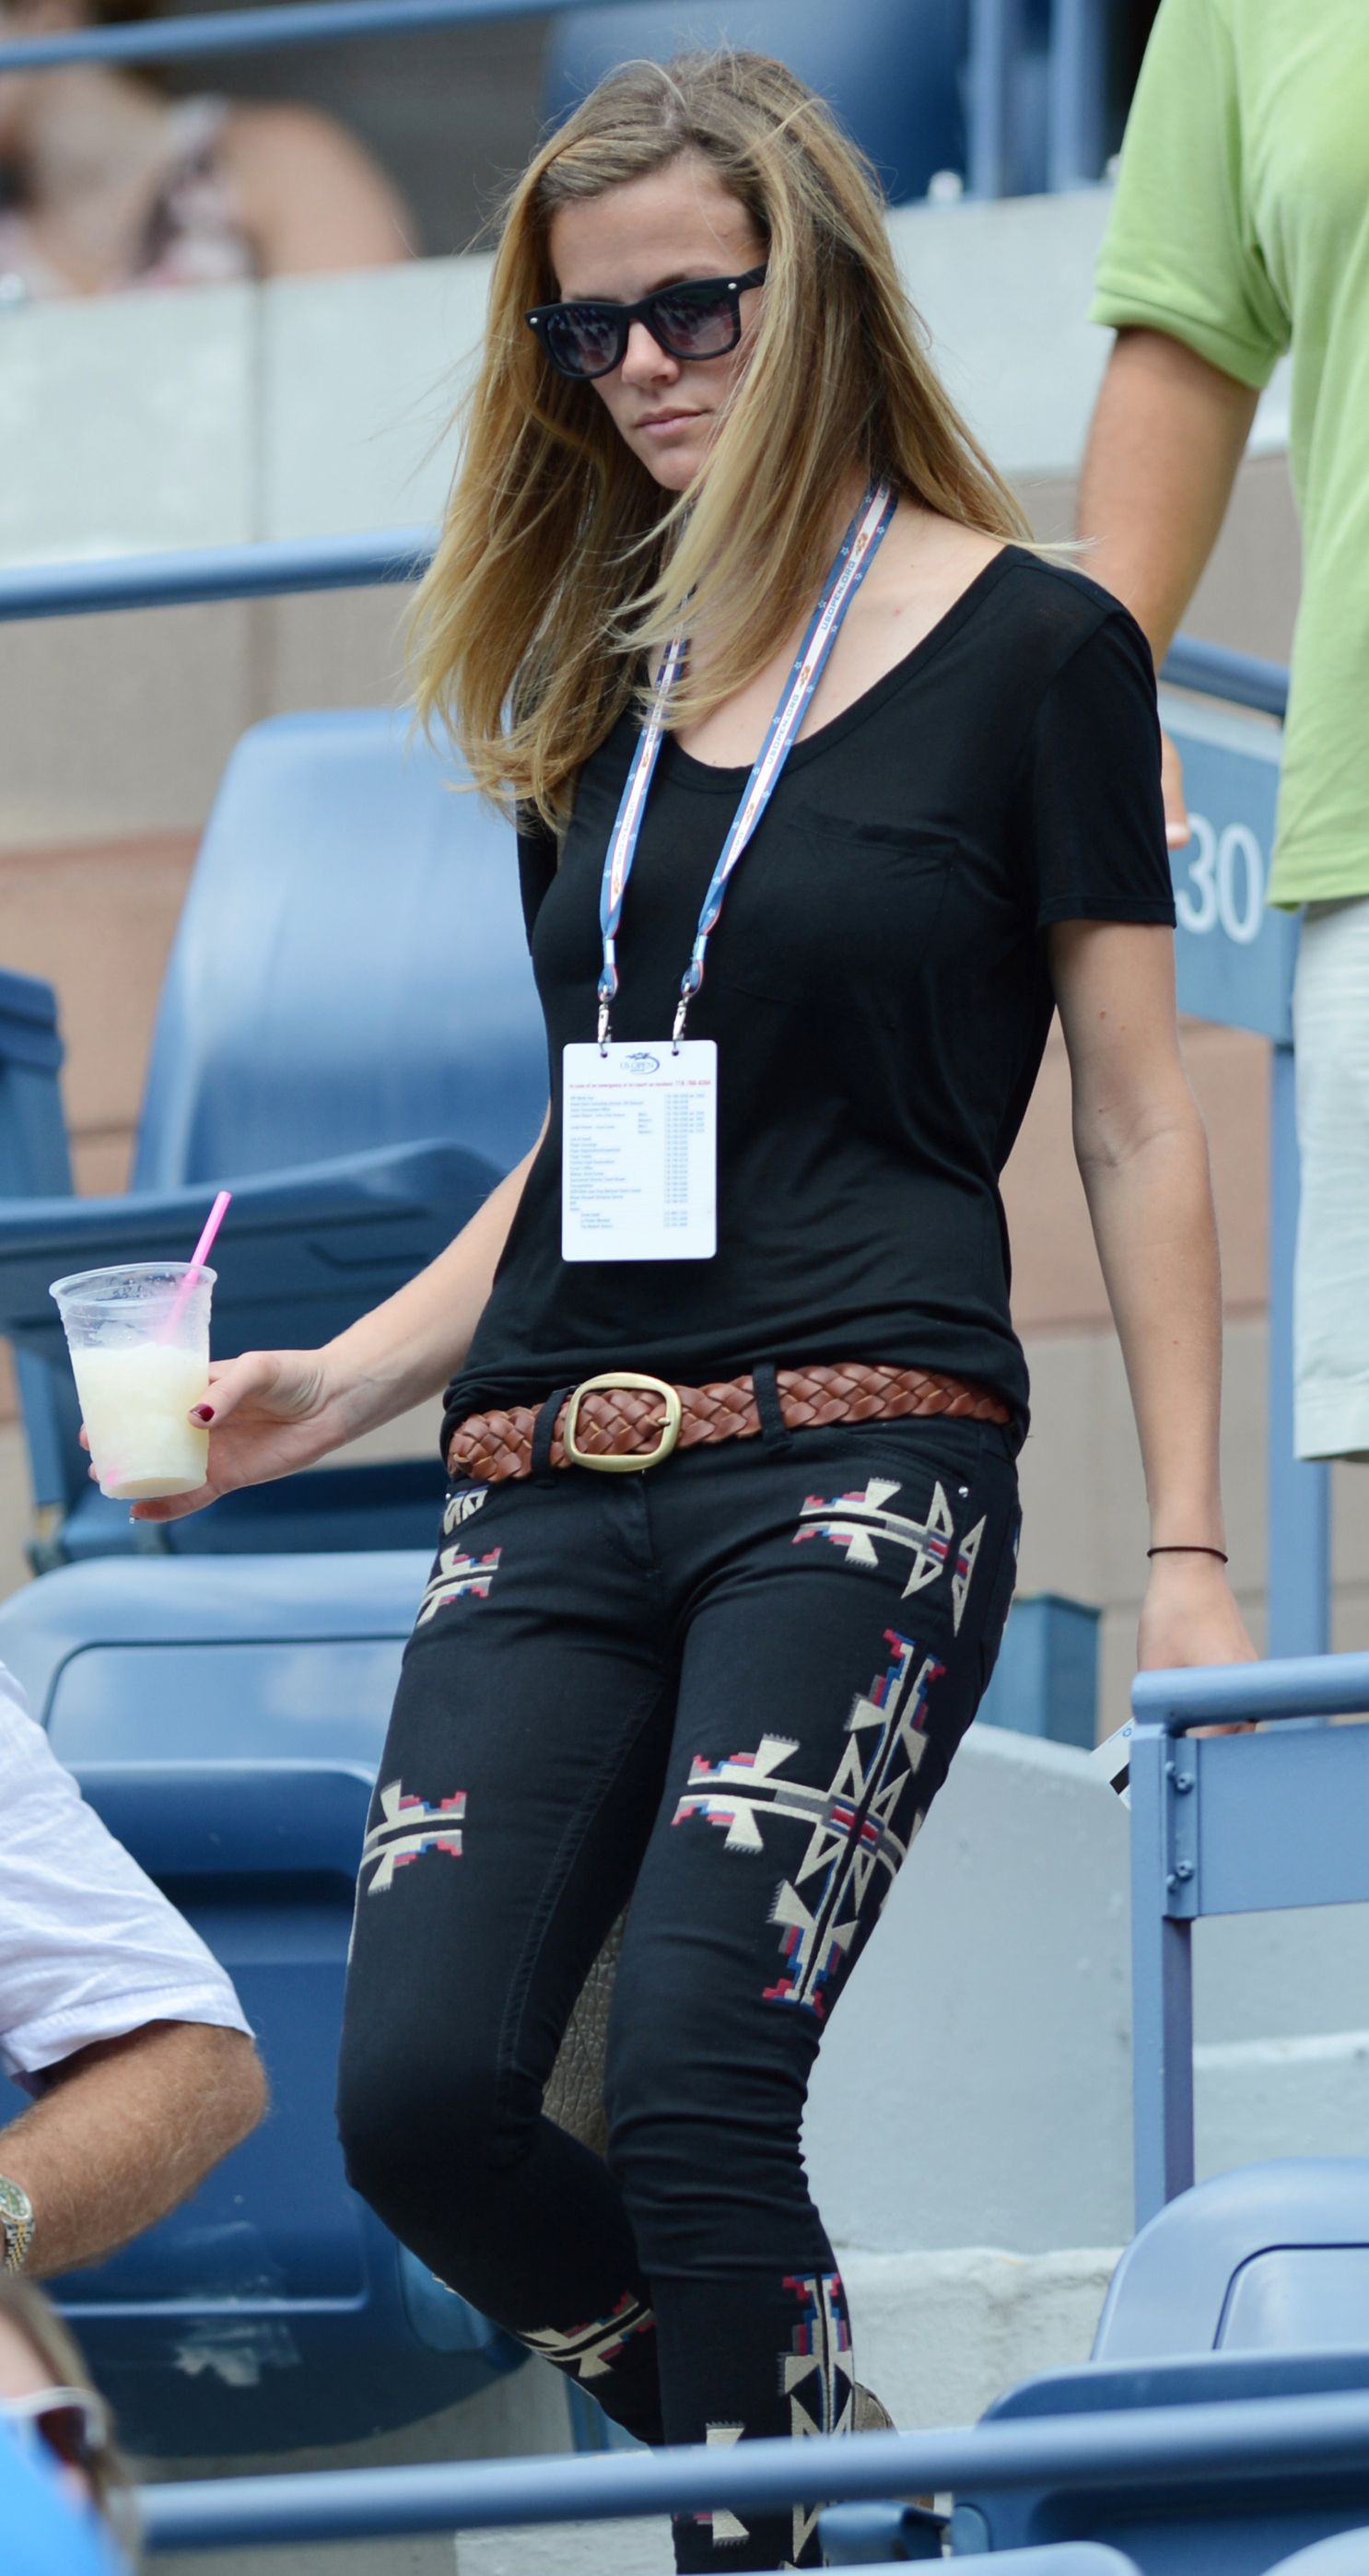 Brooklyn Decker In thight jeans at US Open 2012